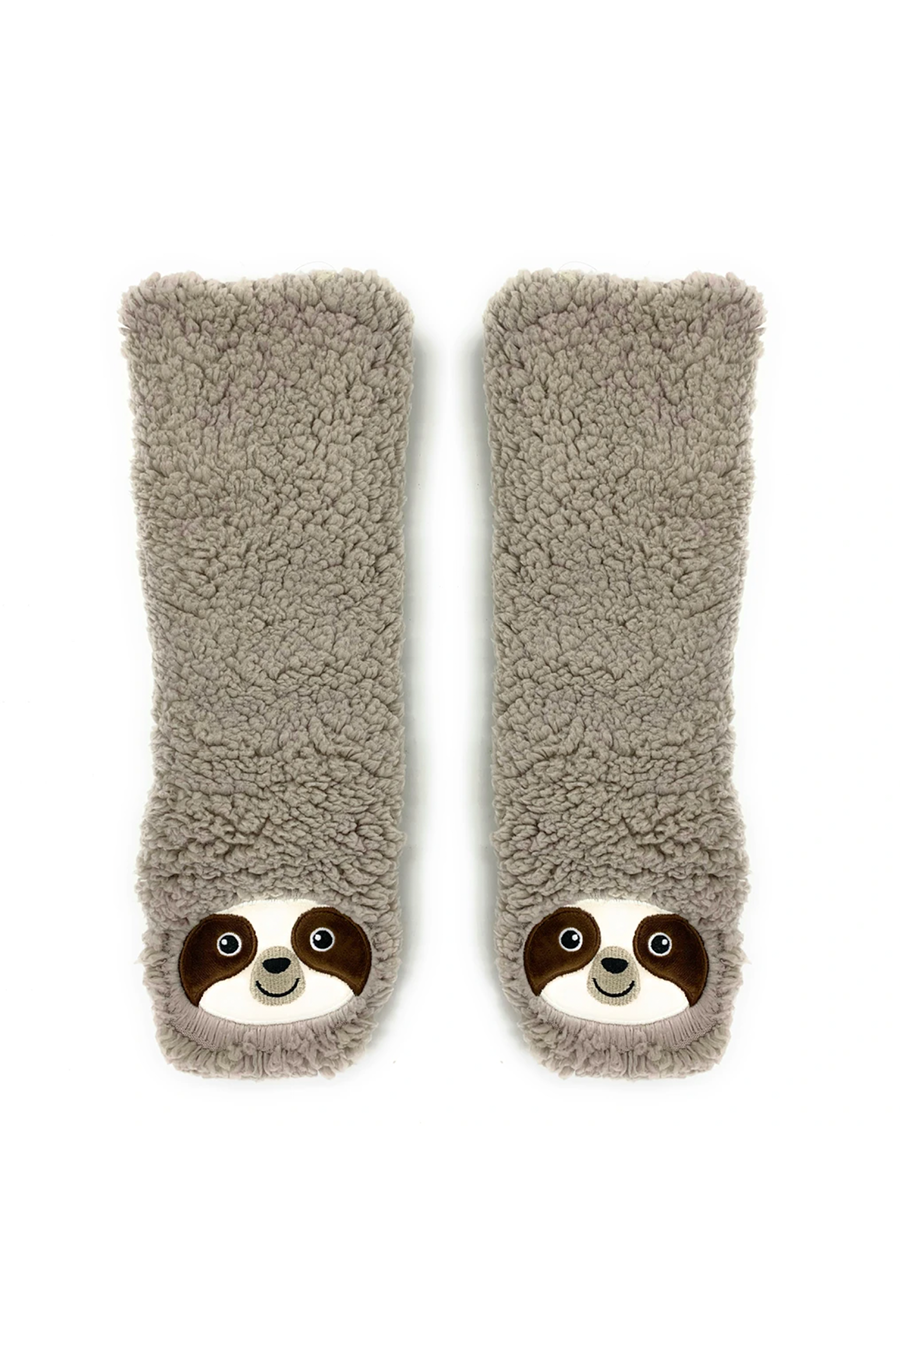 Women's Sherpa Slipper | Sloth Time - Main Image Number 1 of 2